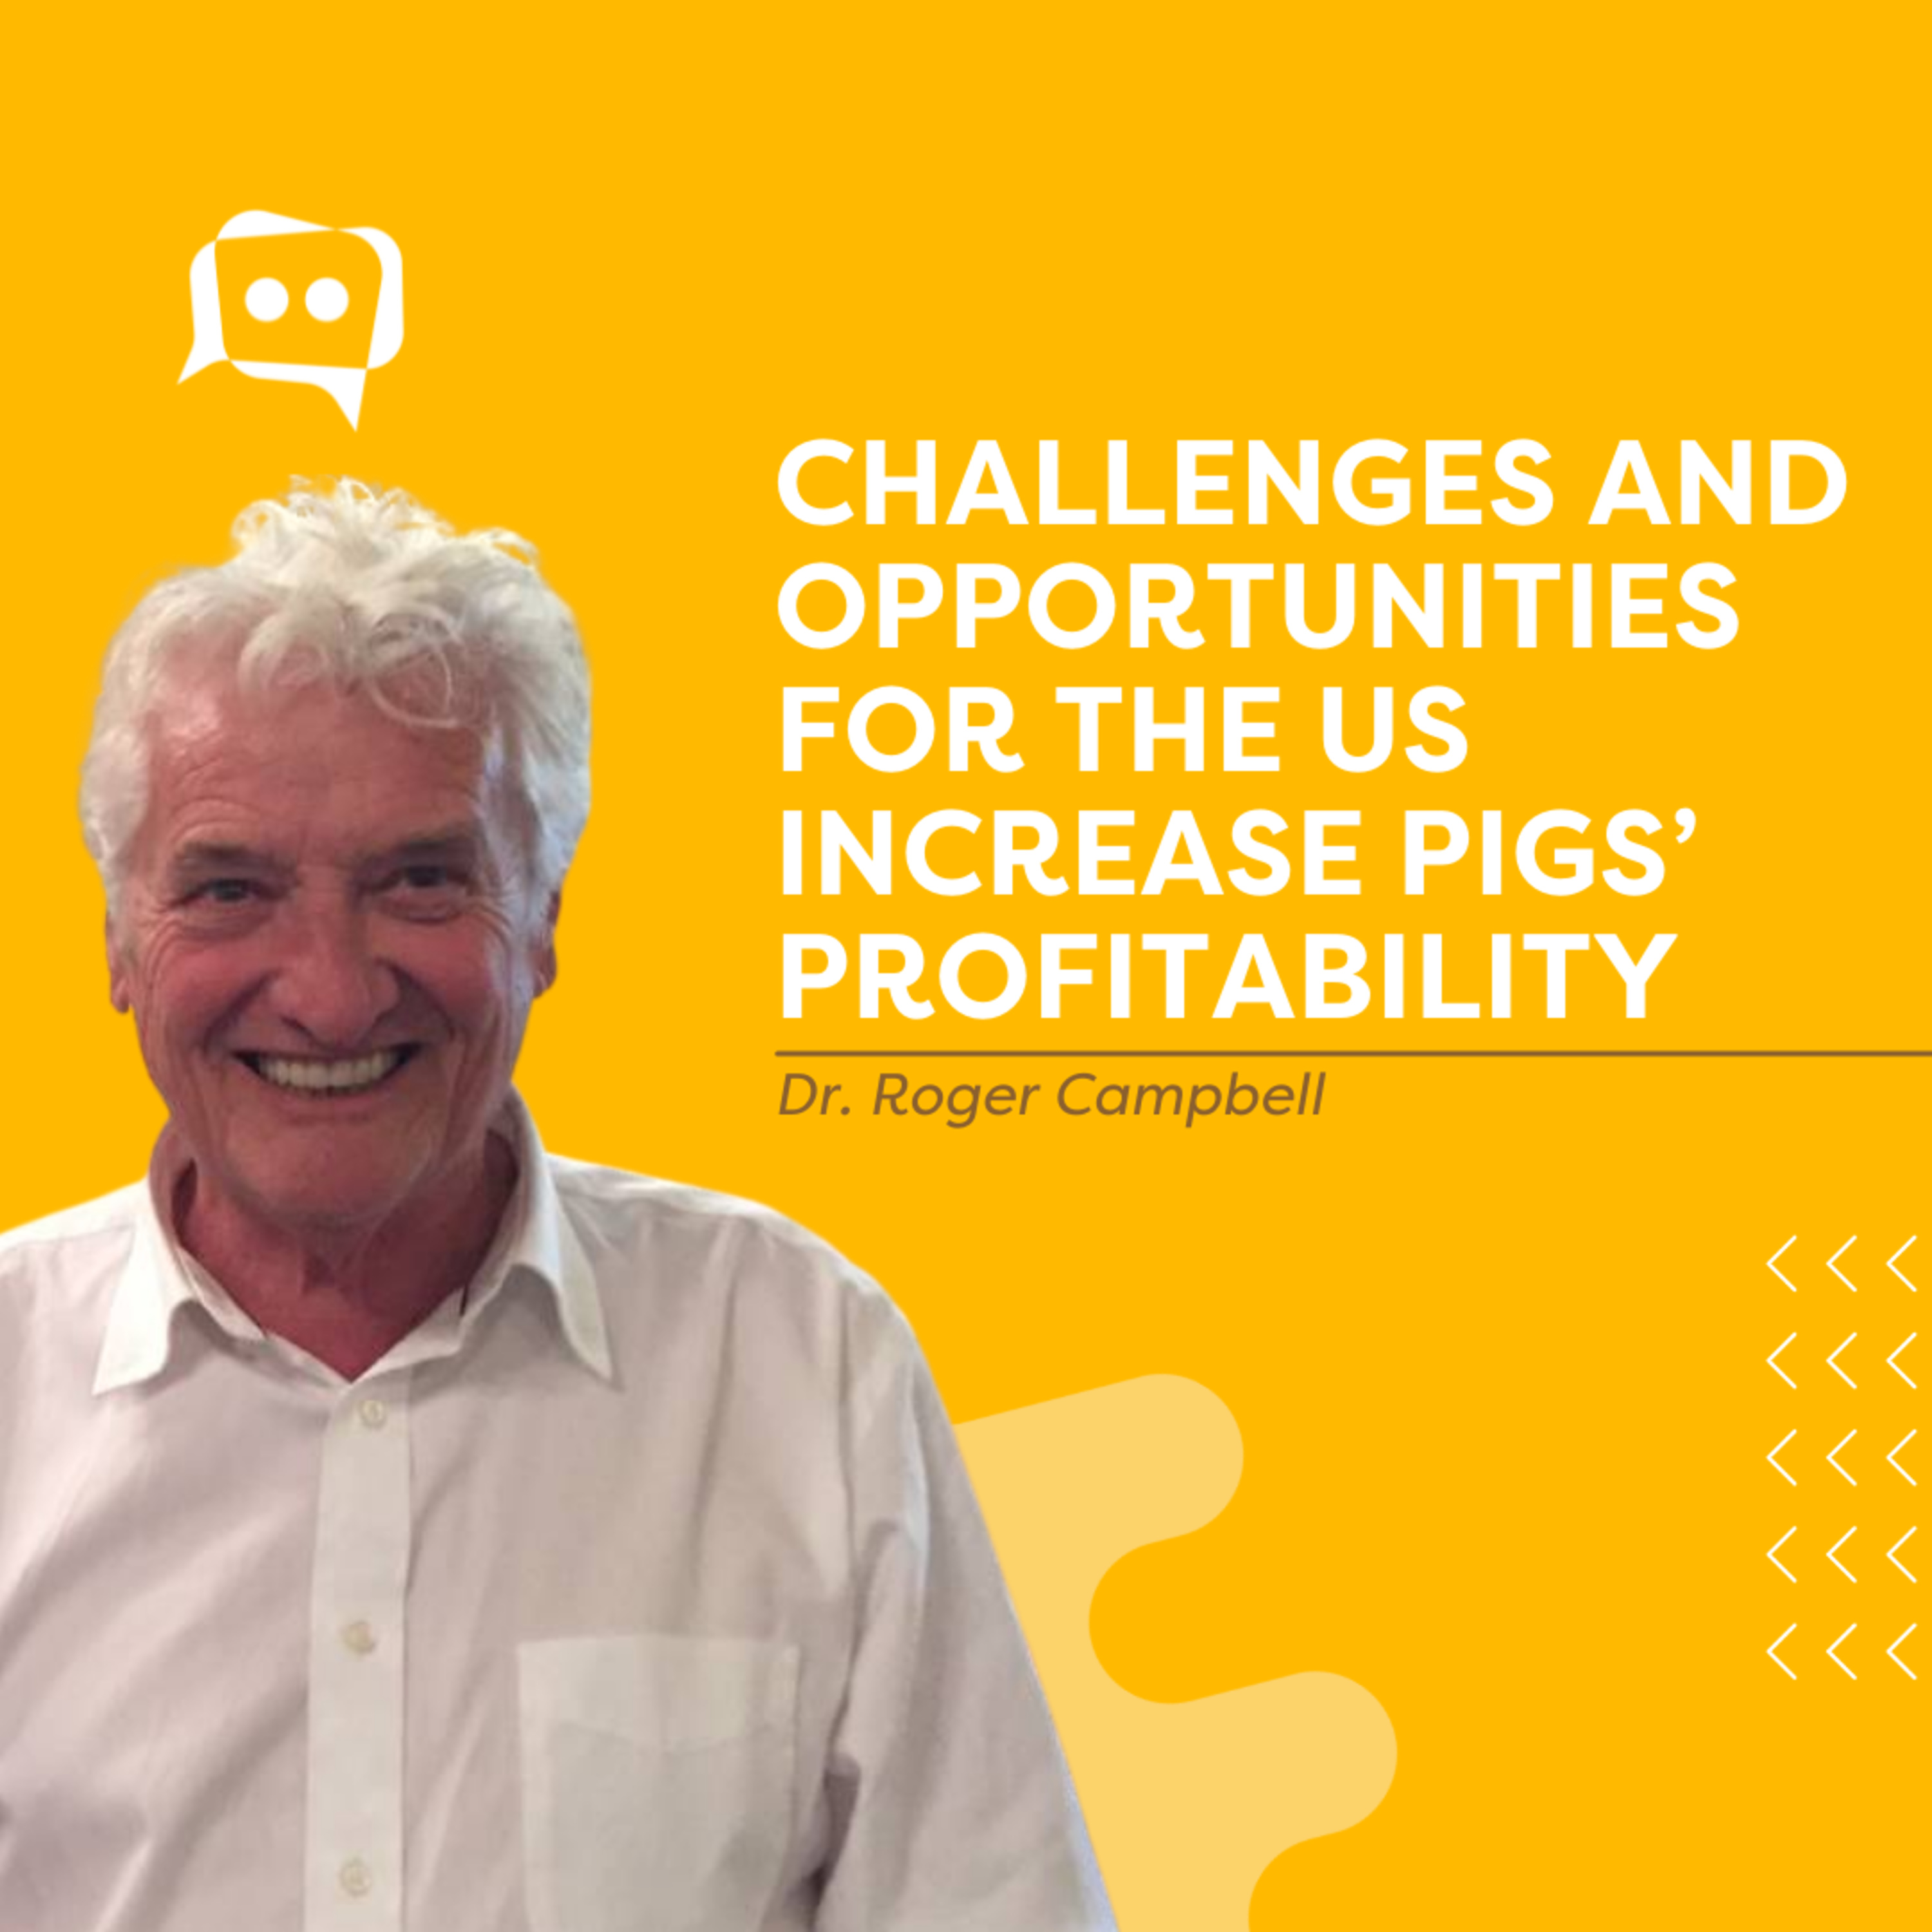 #SHORTS: Challenges and opportunities for the US increase pigs’ profitability, with Dr. Roger Campbell